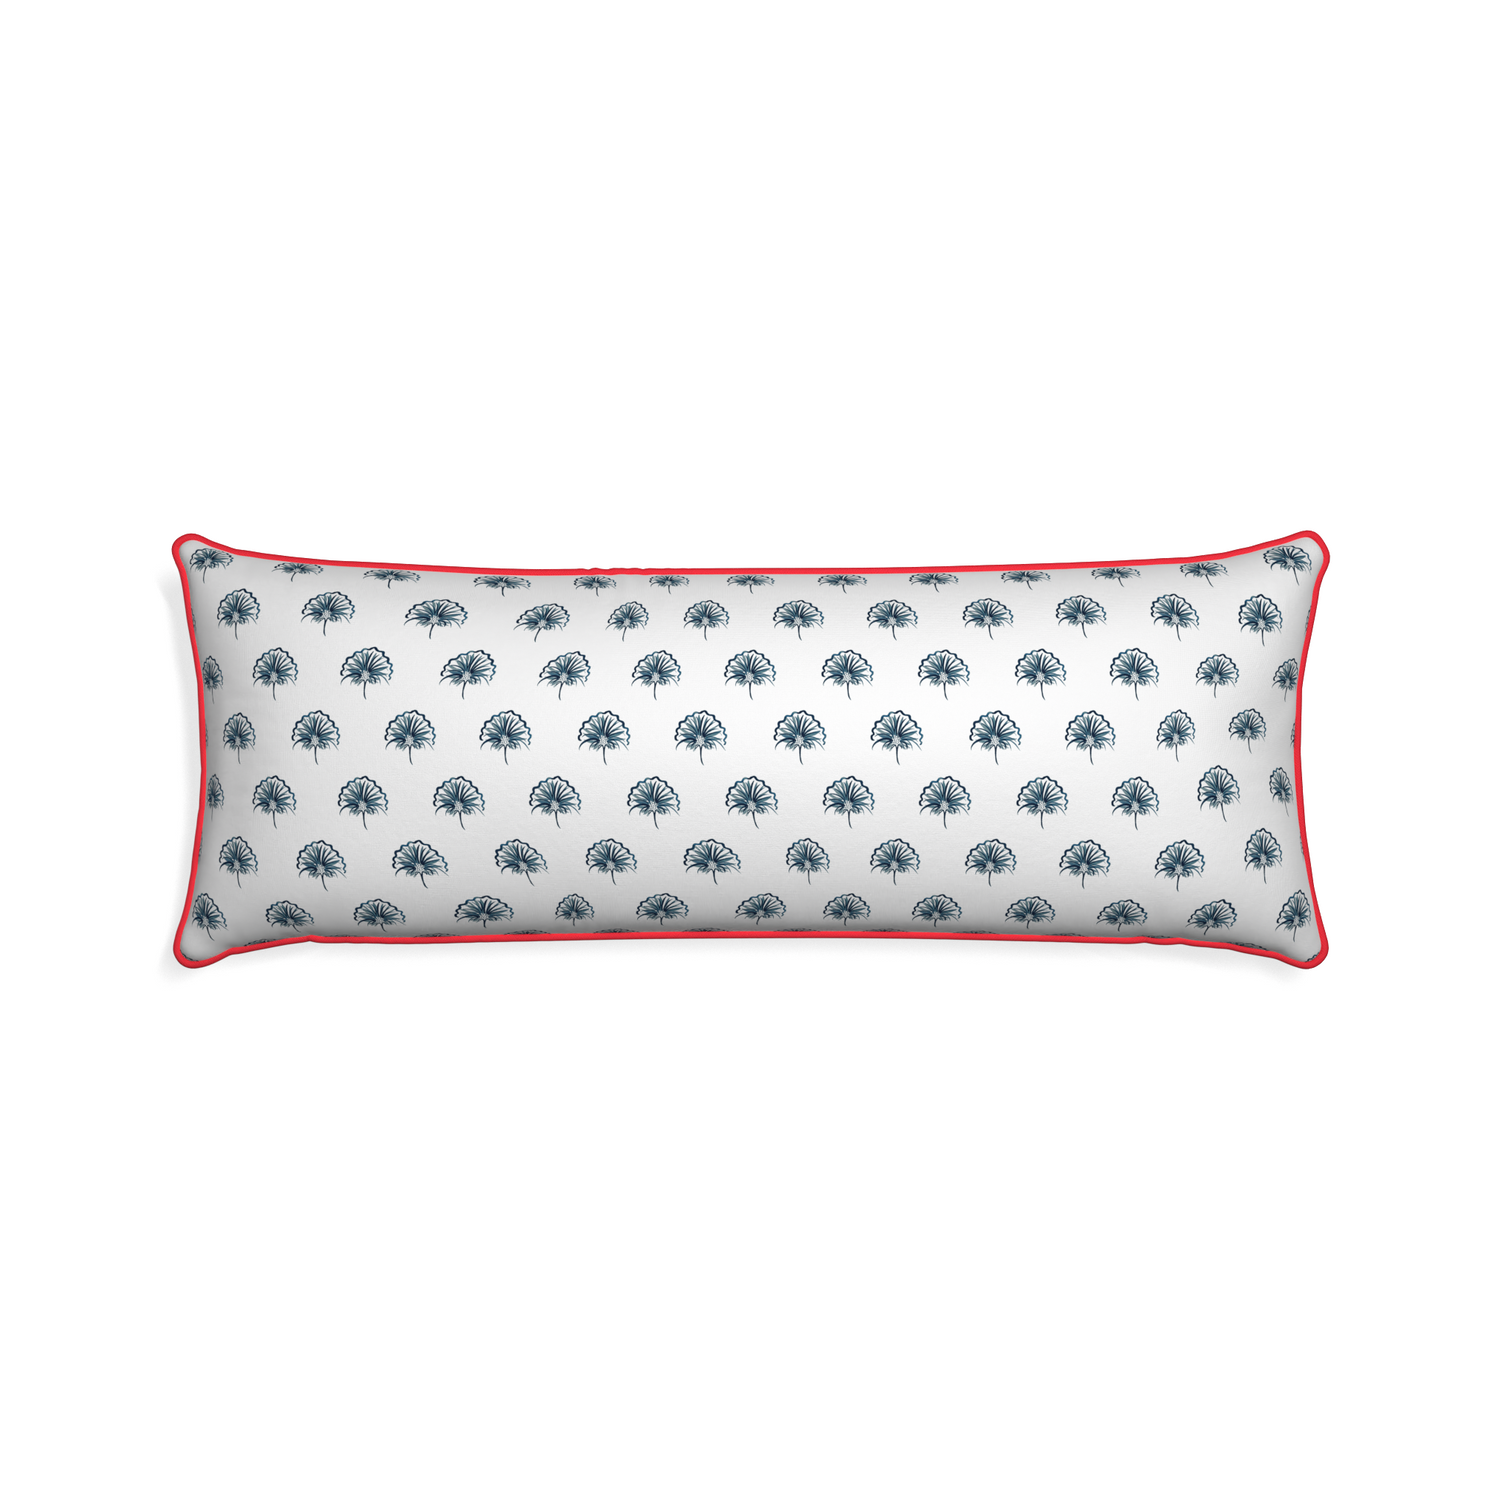 Xl-lumbar penelope midnight custom floral navypillow with cherry piping on white background